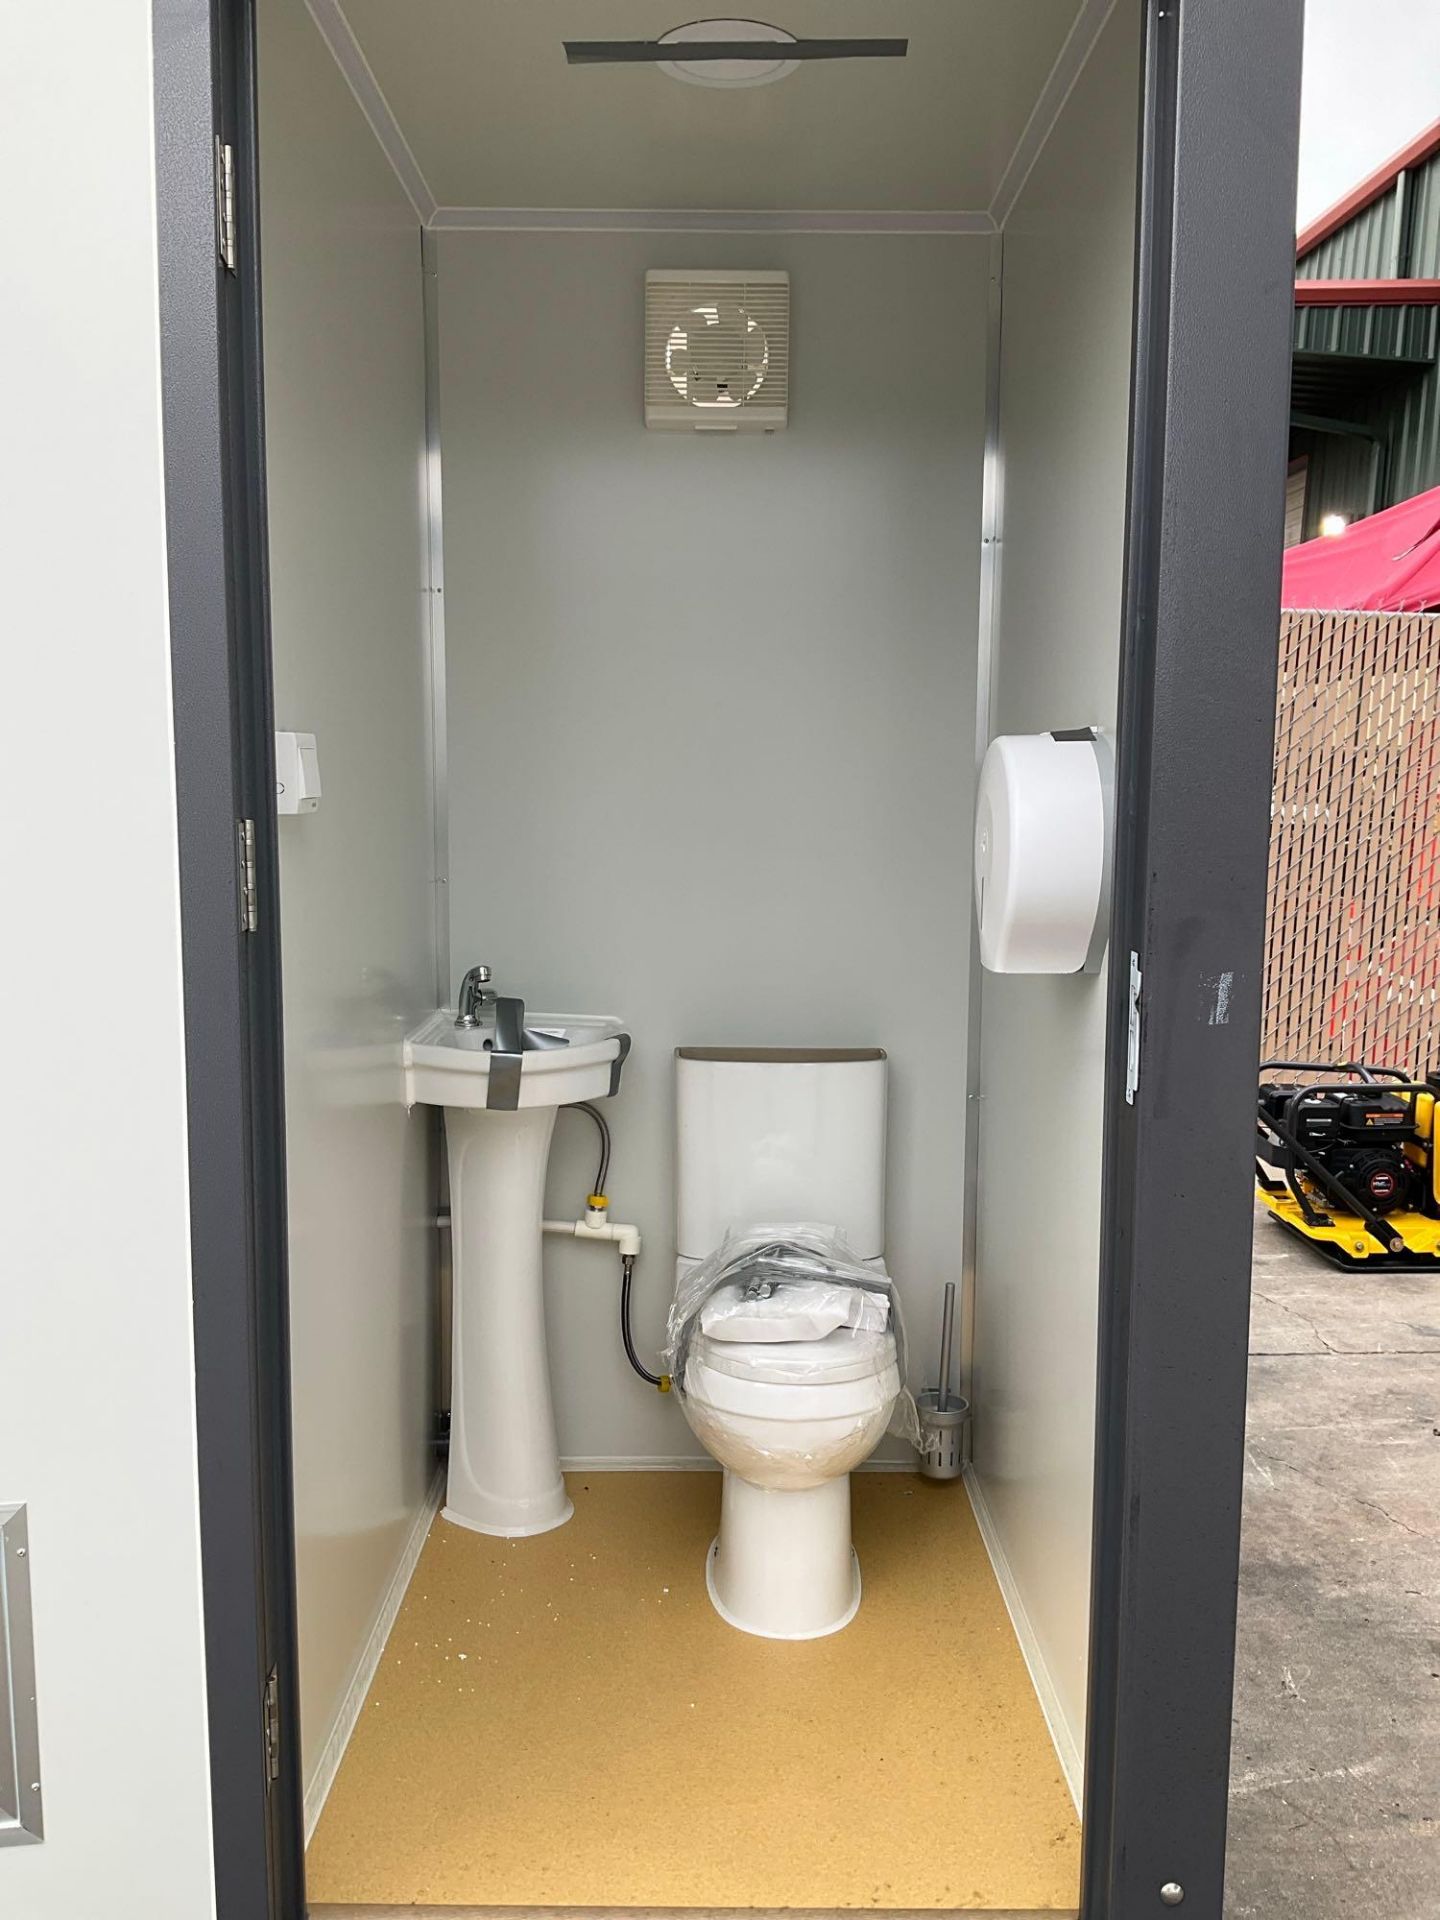 UNUSED PORTABLE DOUBLE BATHROOM UNIT, 2 STALLS, ELECTRIC & PLUMBING HOOK UP WITH EXTERIOR PLUMBING - Image 10 of 10